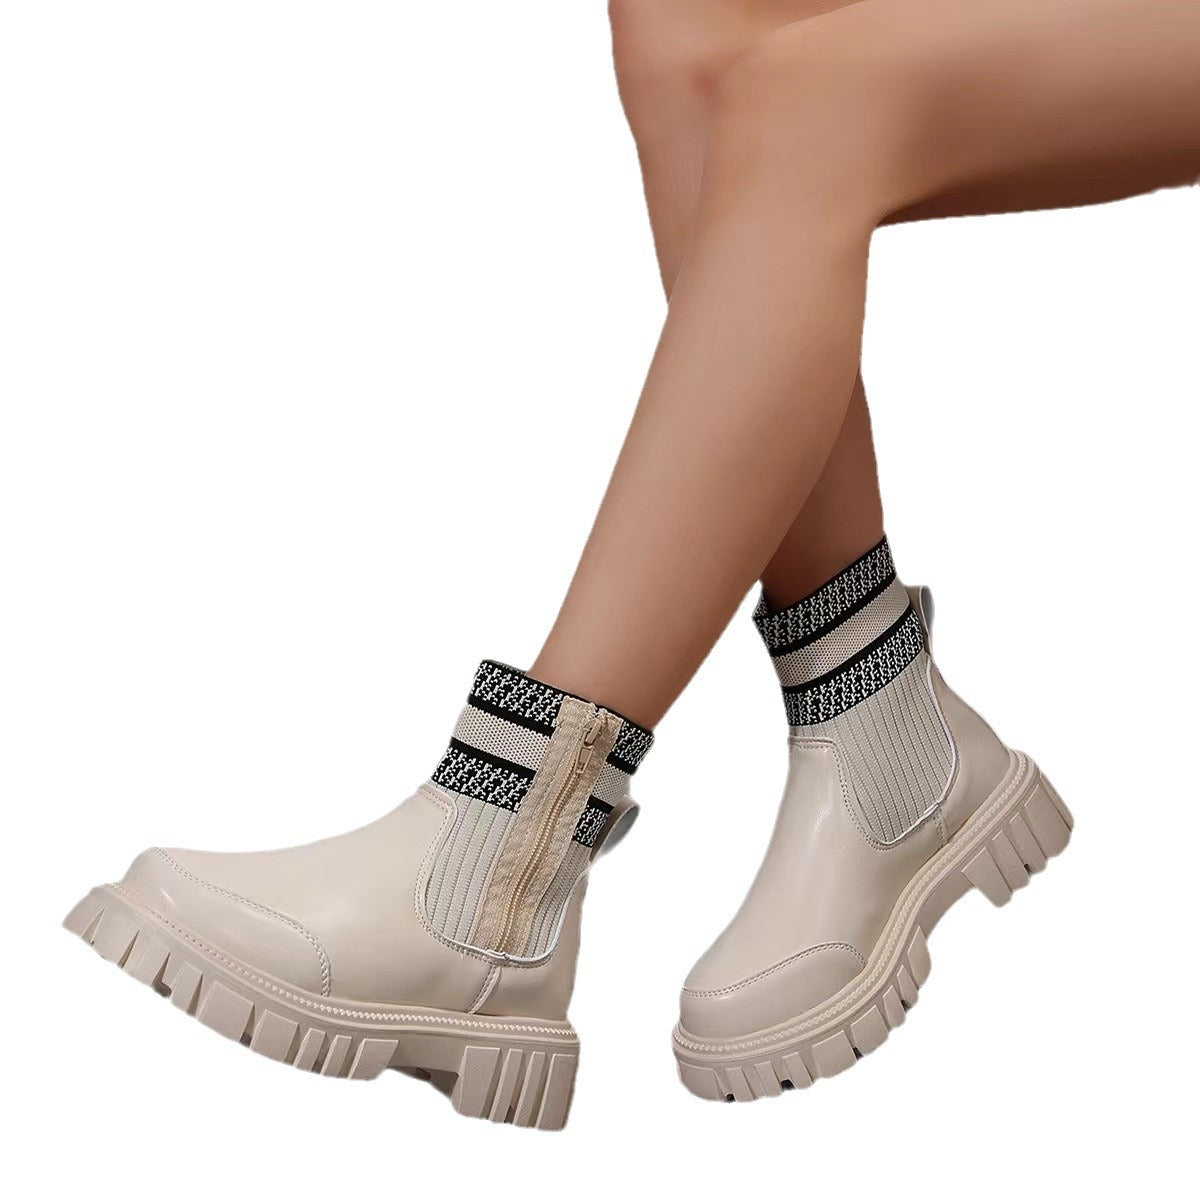 Women's Fashionable Knitted Women's Middle Boots